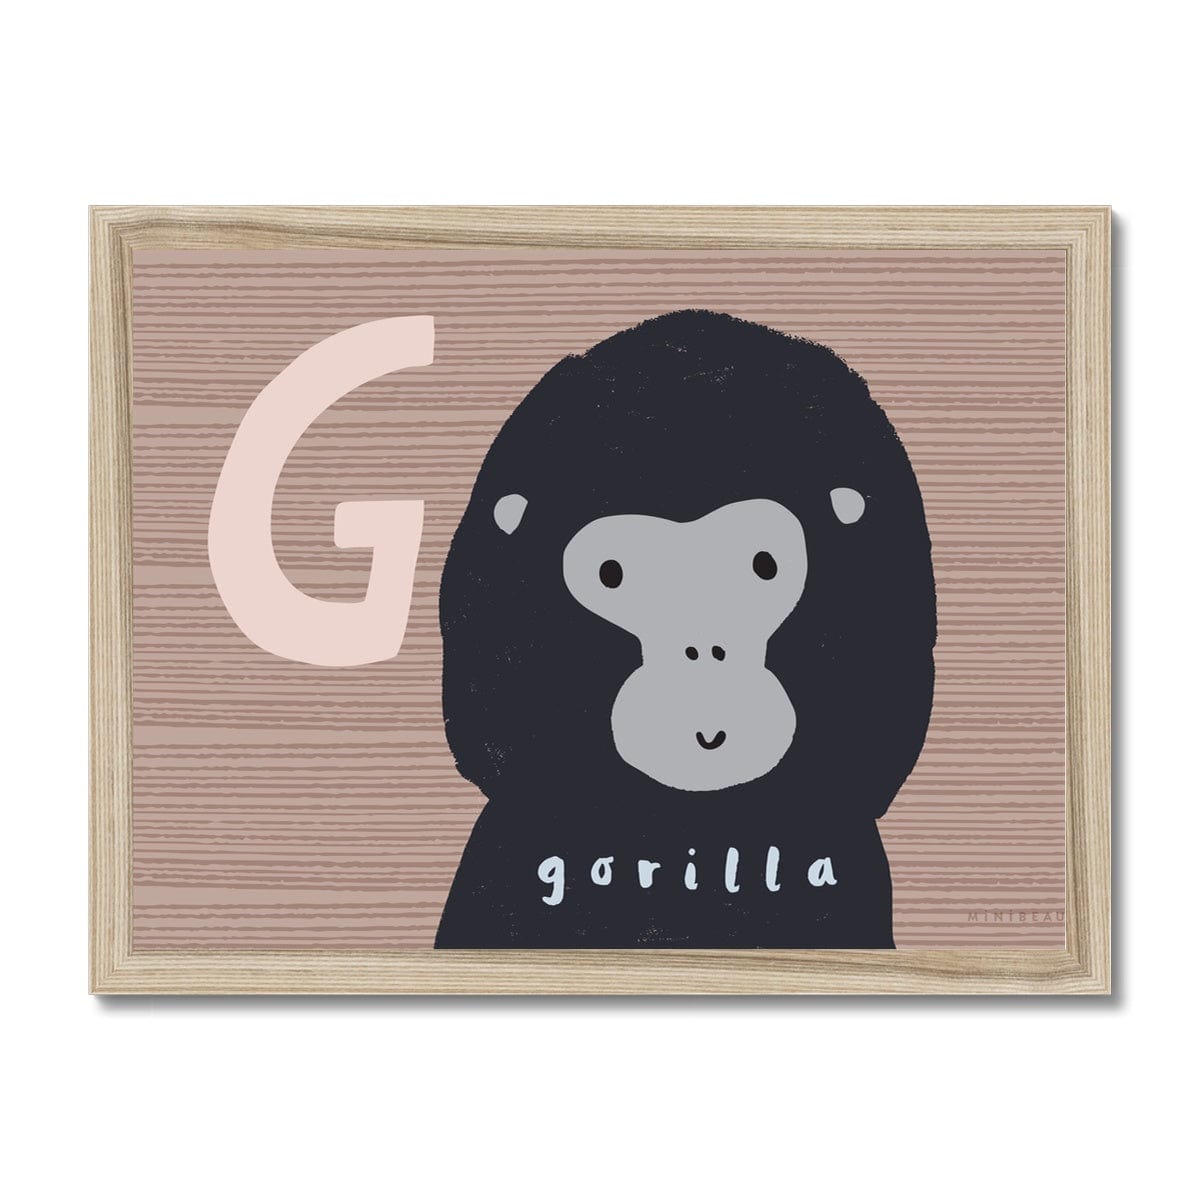 Art print in a natural wood frame. Art print in a light wood frame, leaning against a white wall, standing on parquet flooring. Our G is for Gorilla art print features a smiling cartoon gorilla from the shoulders up, on a brown wood effect background with a large G in a pale brown next to the Gorilla's head.